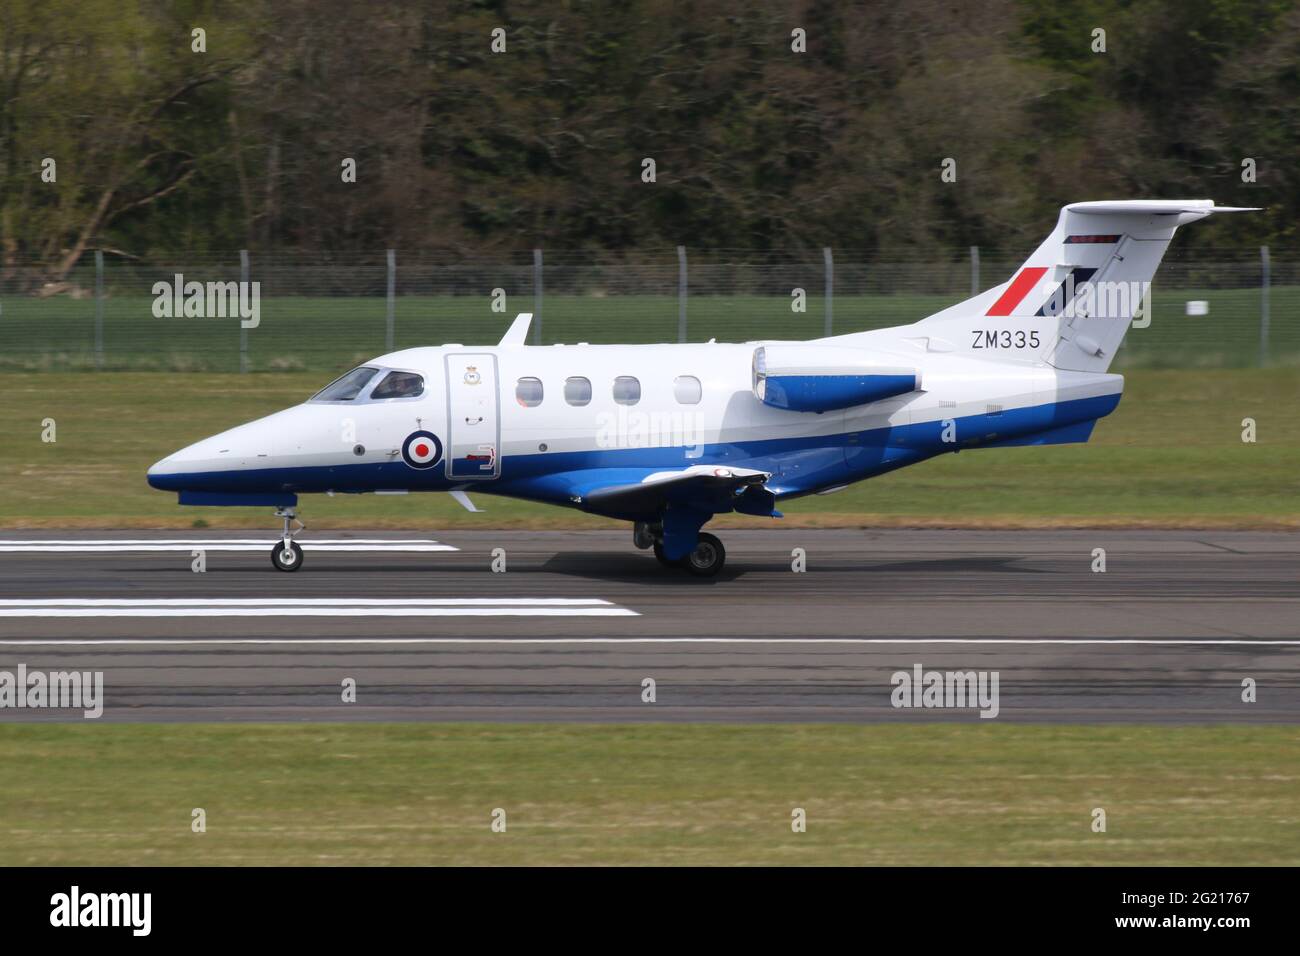 ZM335, an Embraer Phenom T.1 operated by No.45 Squadron of the Royal Air Force, arriving at Prestwick International Airport in Ayrshire, Scotland. Stock Photo